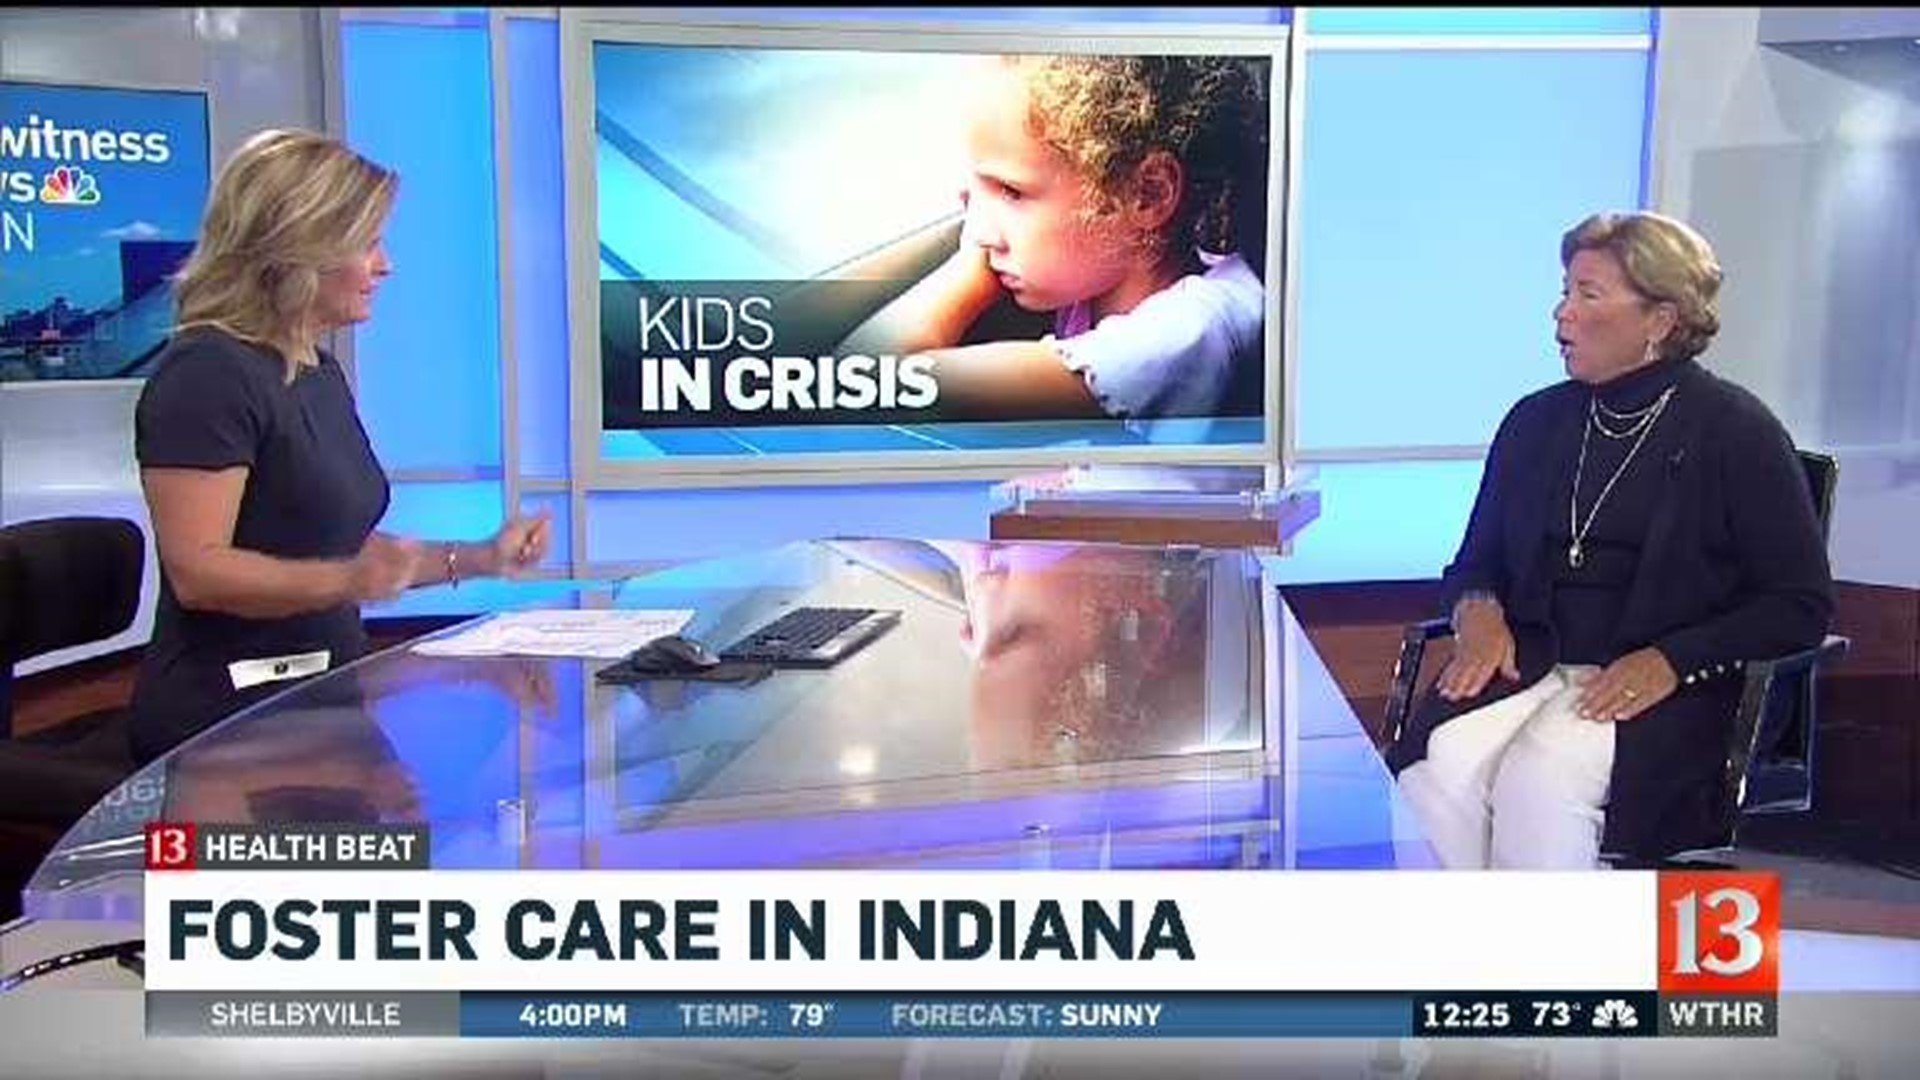 Foster Care in Indiana: The need is great | wthr.com